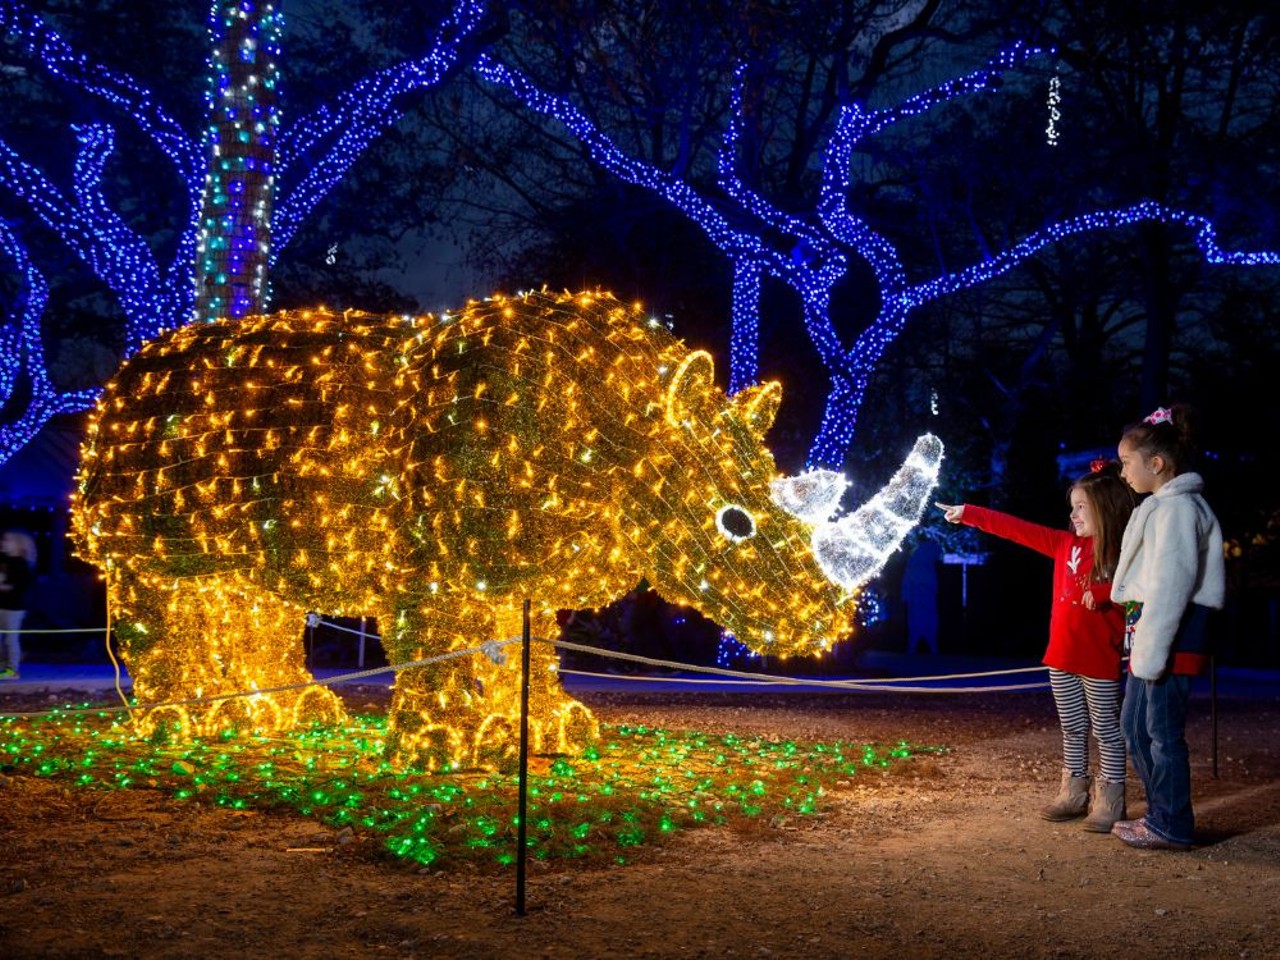 San Antonio Zoo
3903 N. St. Mary's St., (210) 734-7184, sazoo.org/zoo-lights
The annual Zoo Lights at the San Antonio Zoo is full of animal-themed holiday cheer. This year's edition includes the brand new Polar Playground and Lakeside Laser Lightshow, plus attractions including the Holiday Sing-a-Long Express train ride and Cowboy’s Yuletide Trail. Zoo Lights is open through Dec. 31.